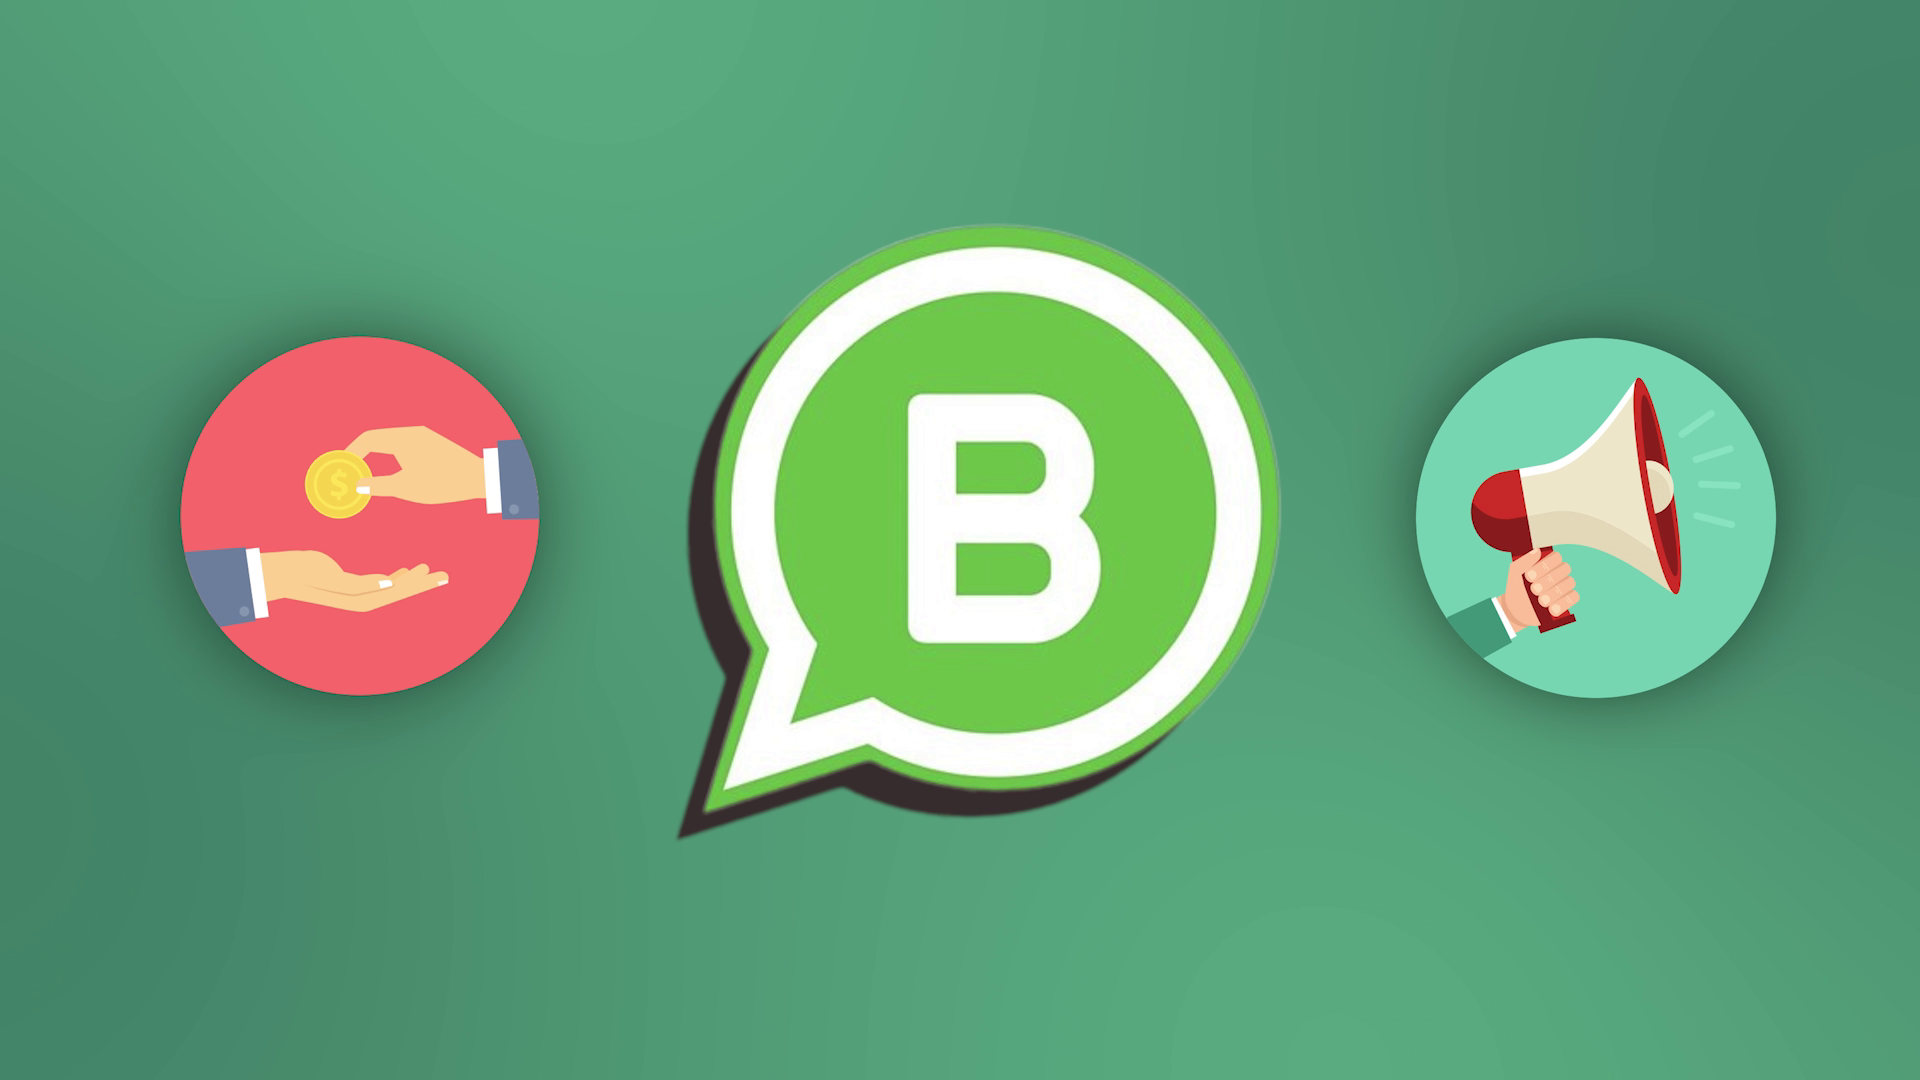 Enhancing Business Communication and Branding with the WhatsApp Business  Logo